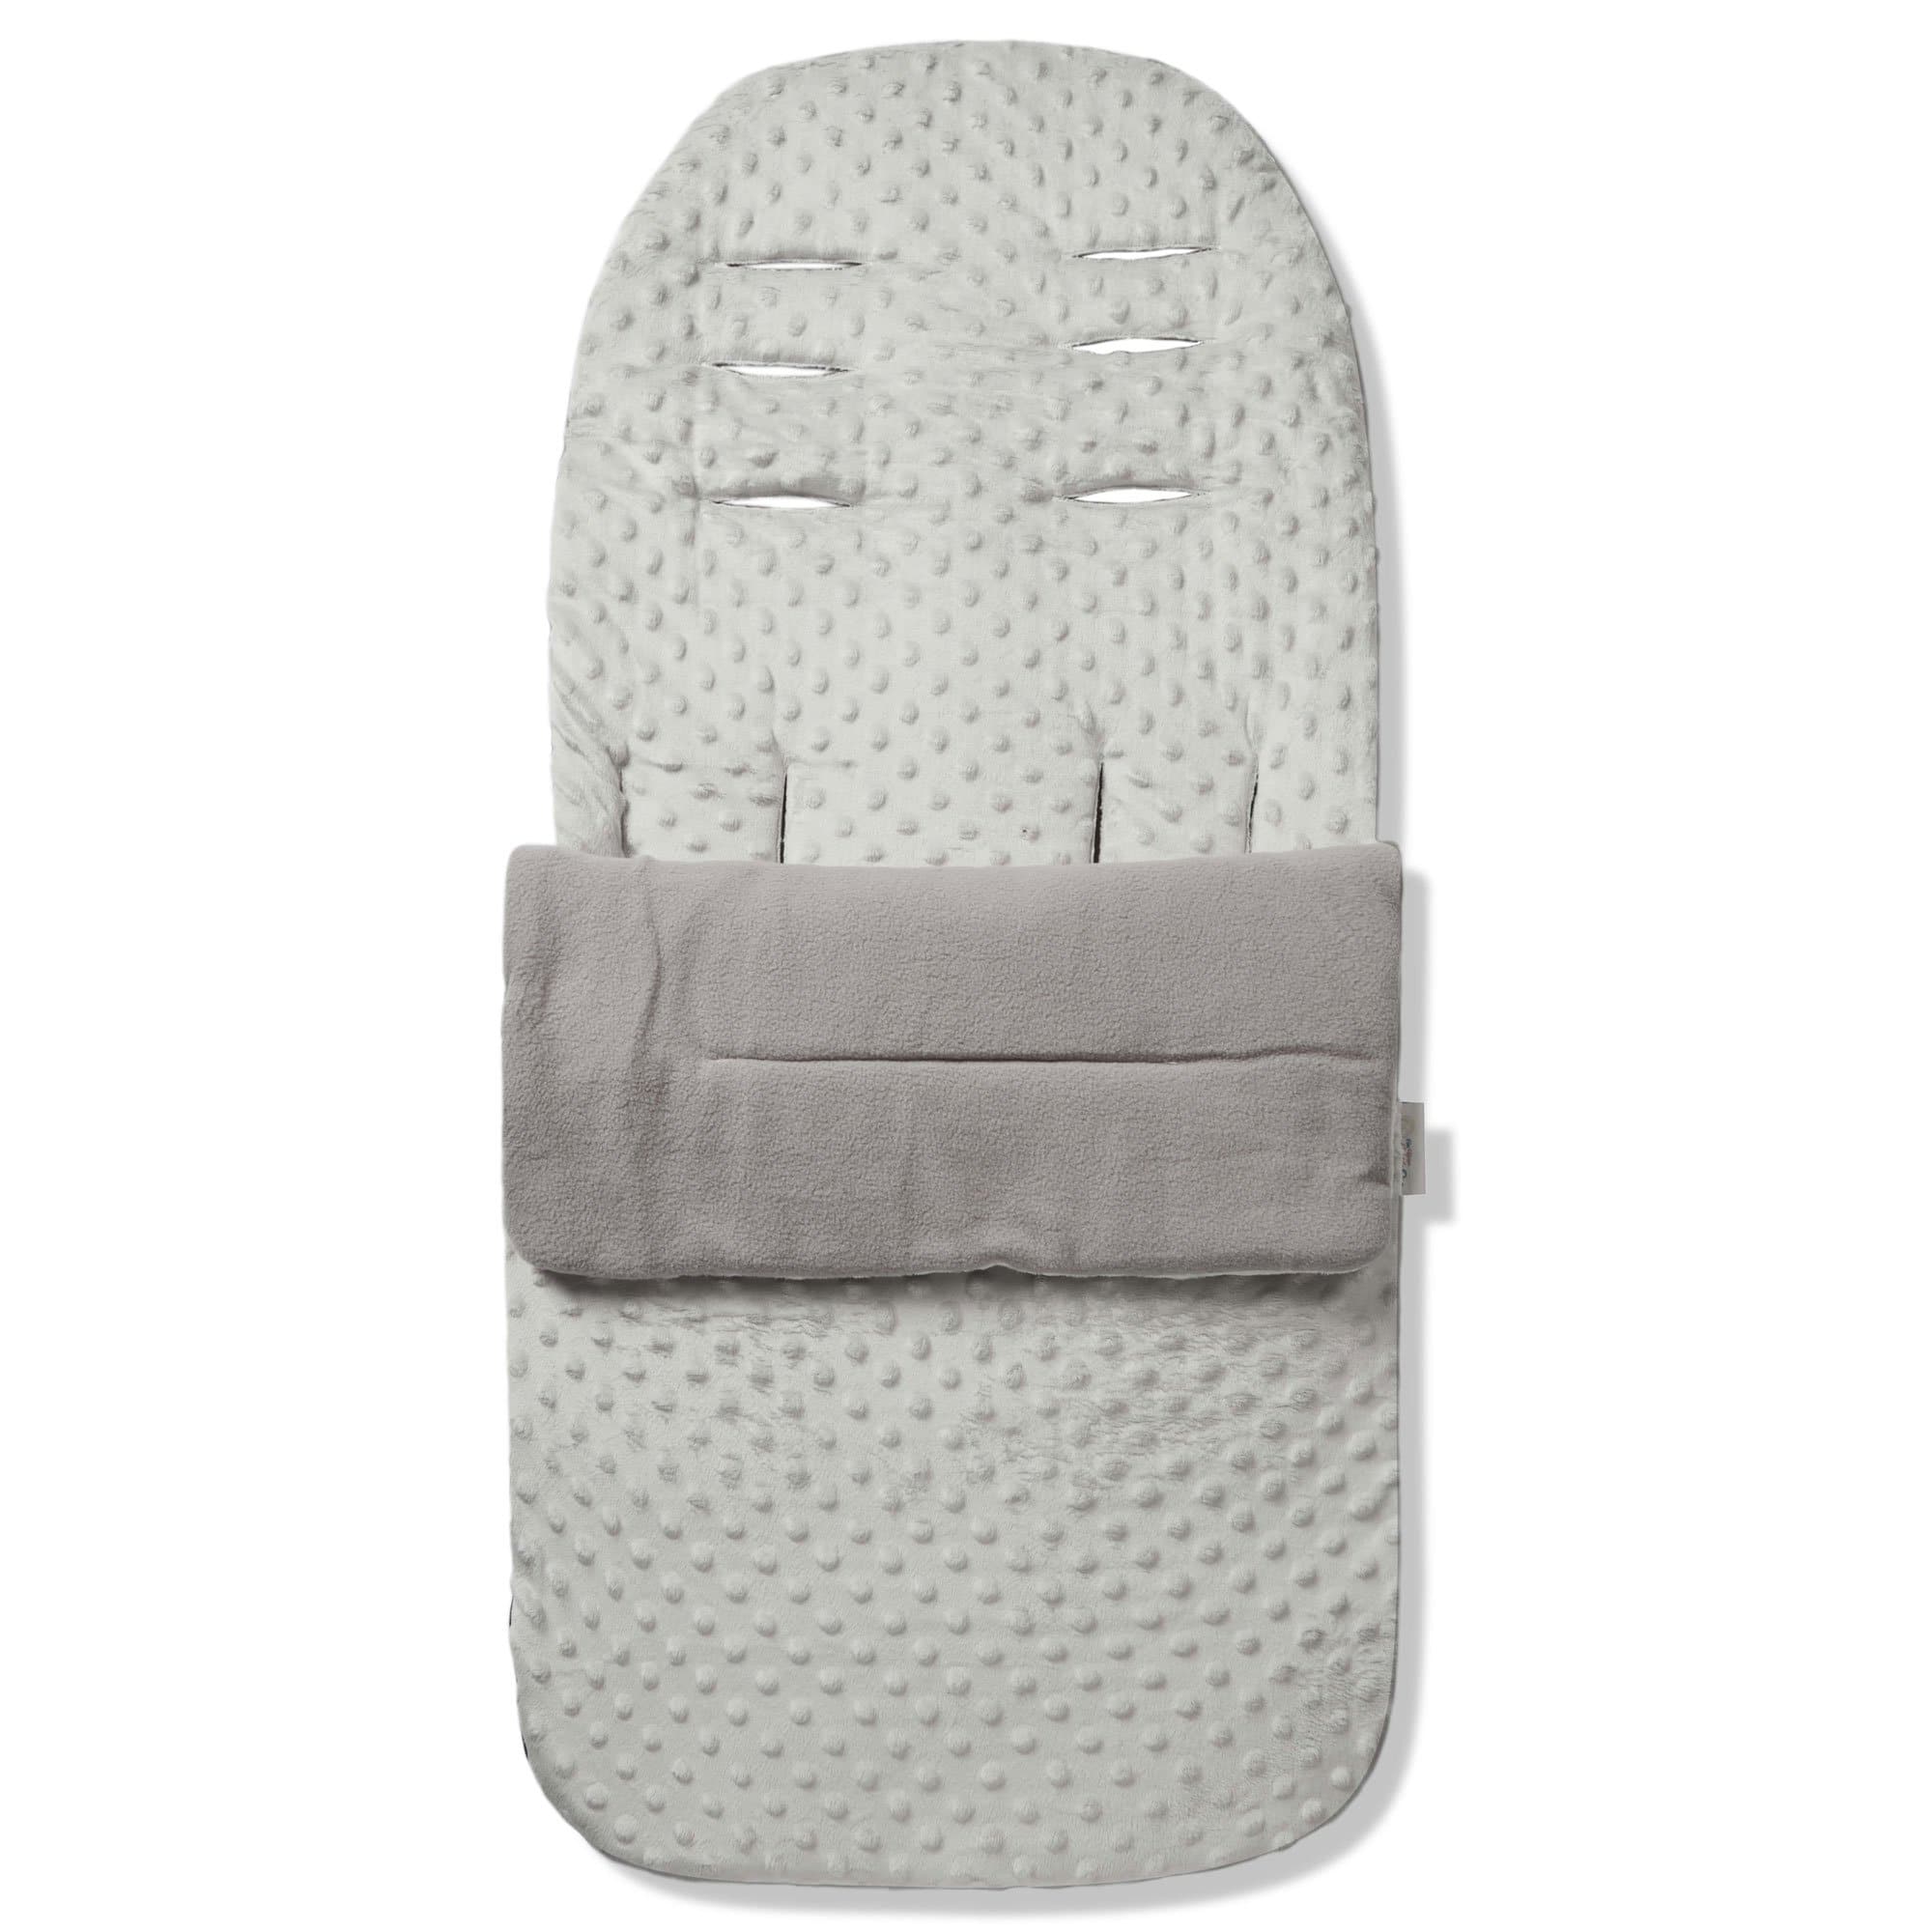 Dimple Footmuff / Cosy Toes Compatible with Brio - Grey / Fits All Models | For Your Little One